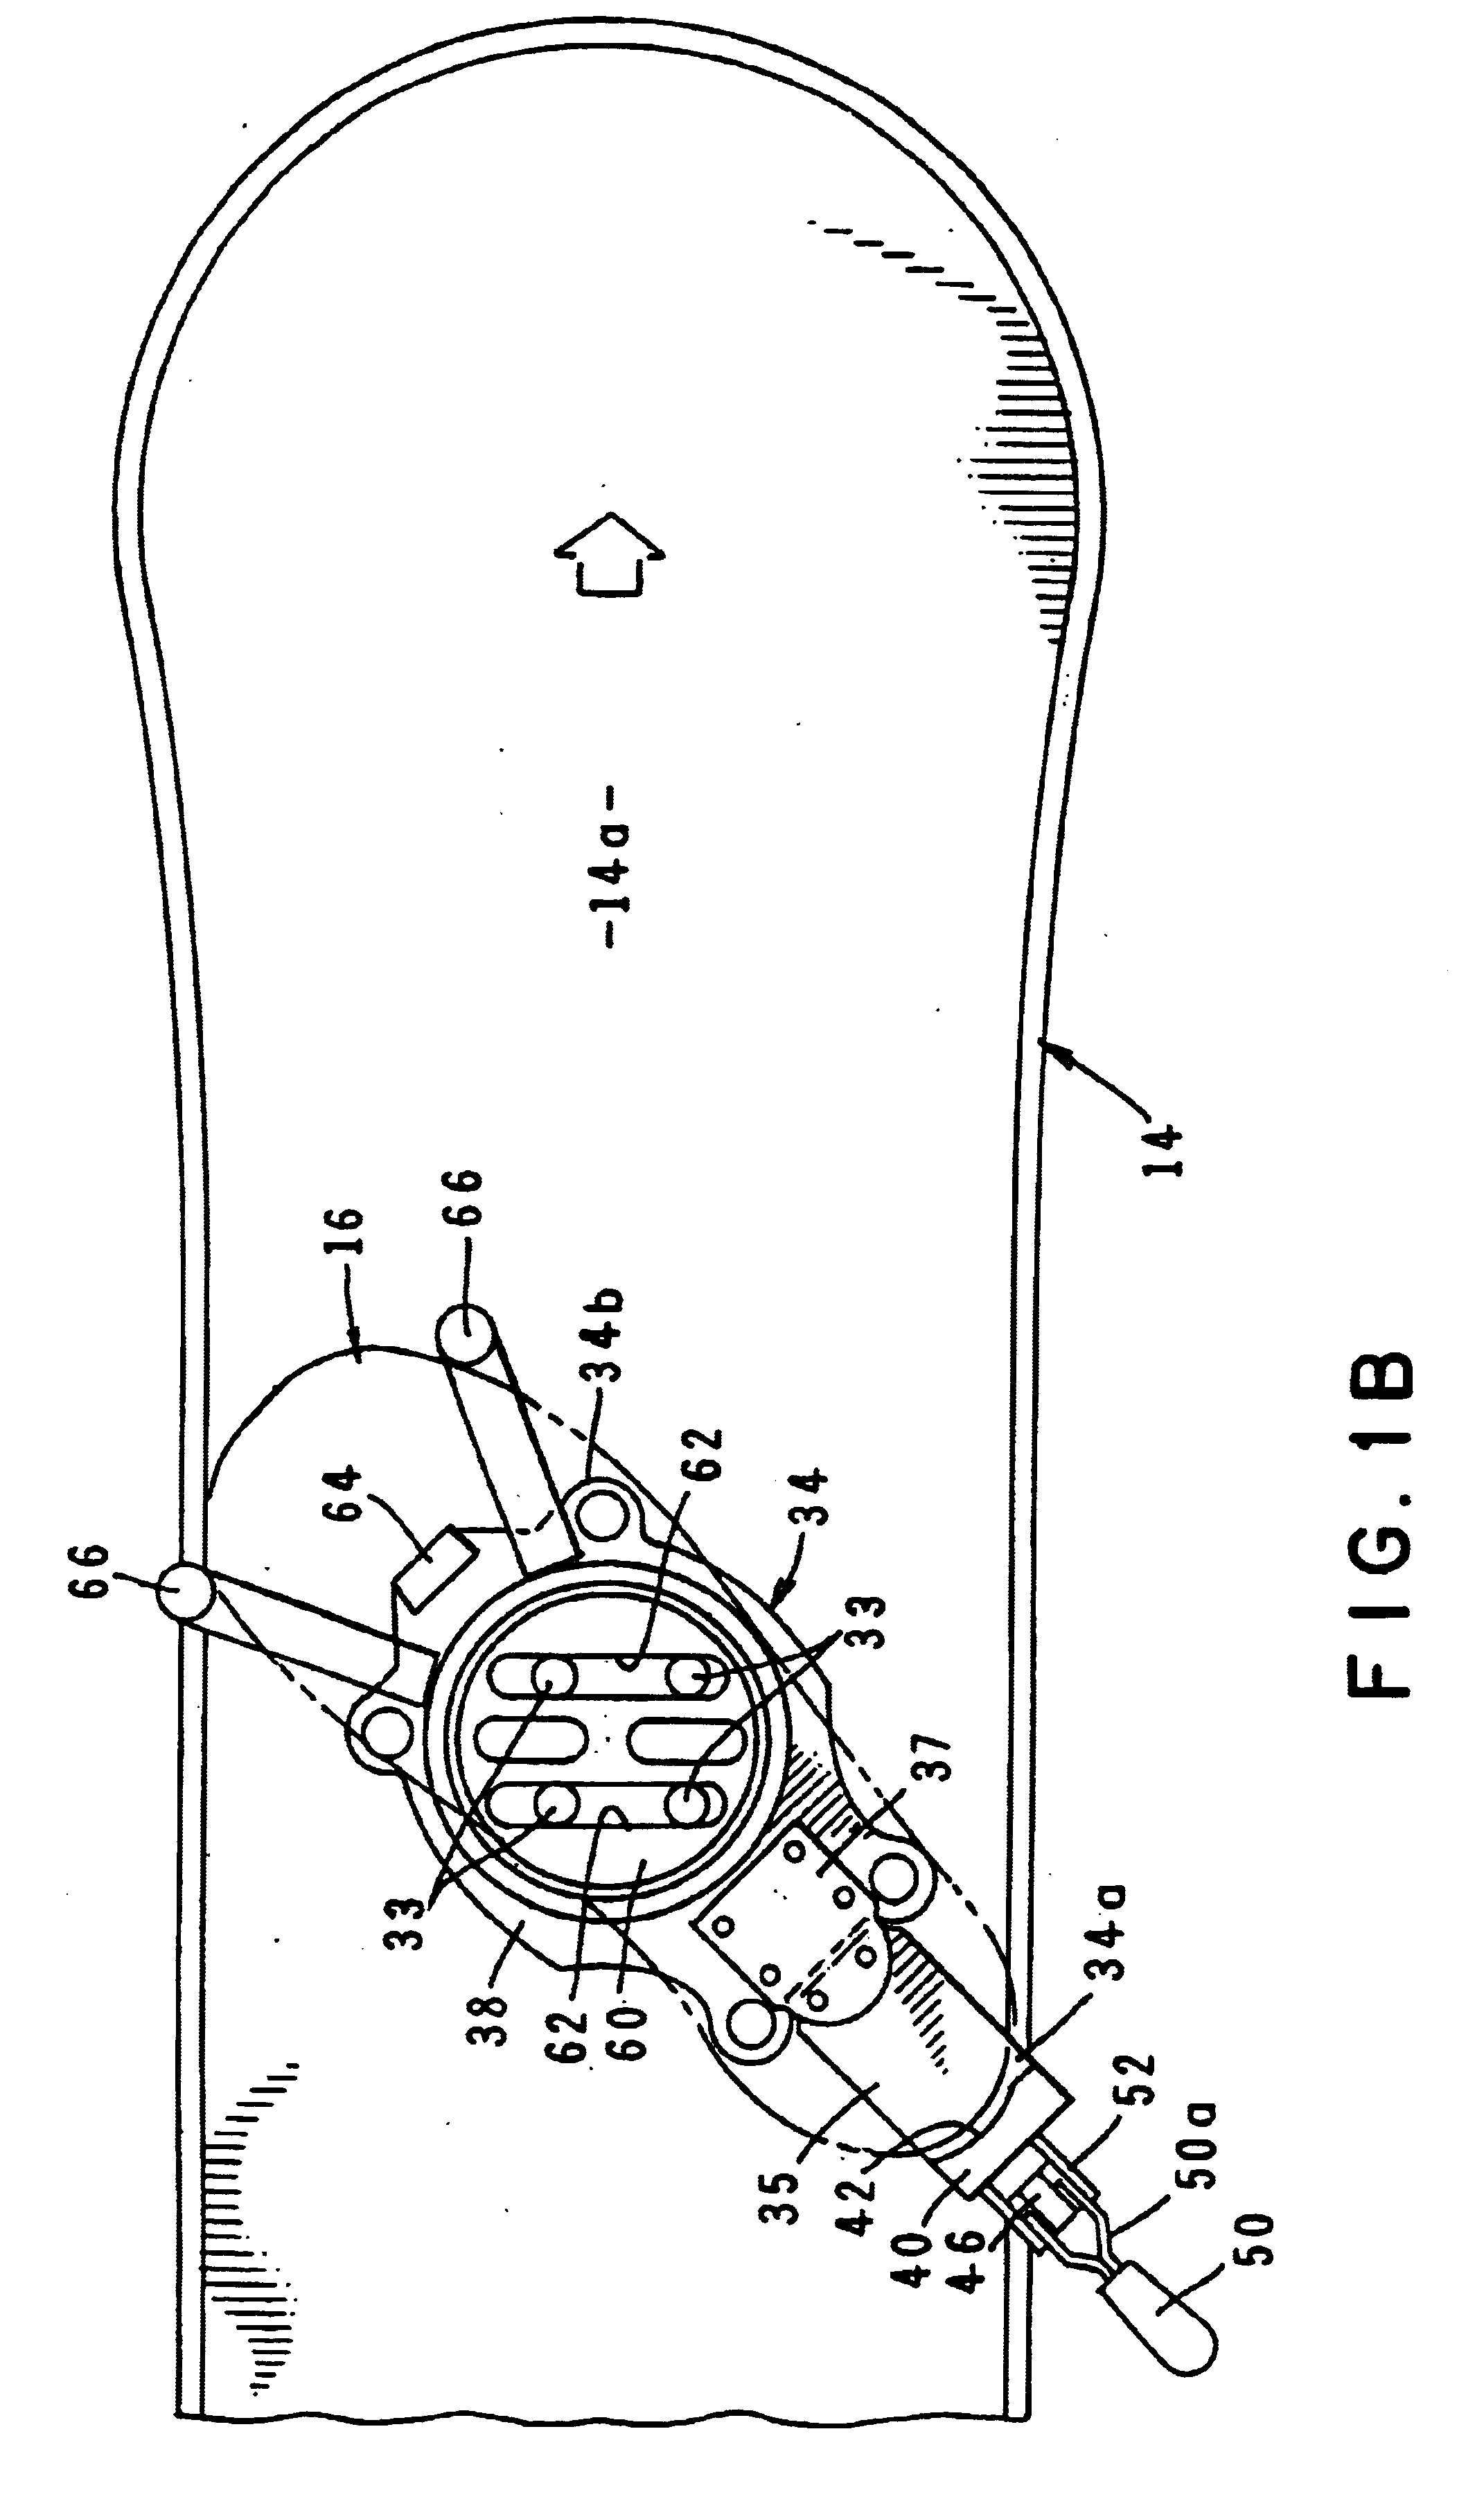 Apparatus for gliding over snow